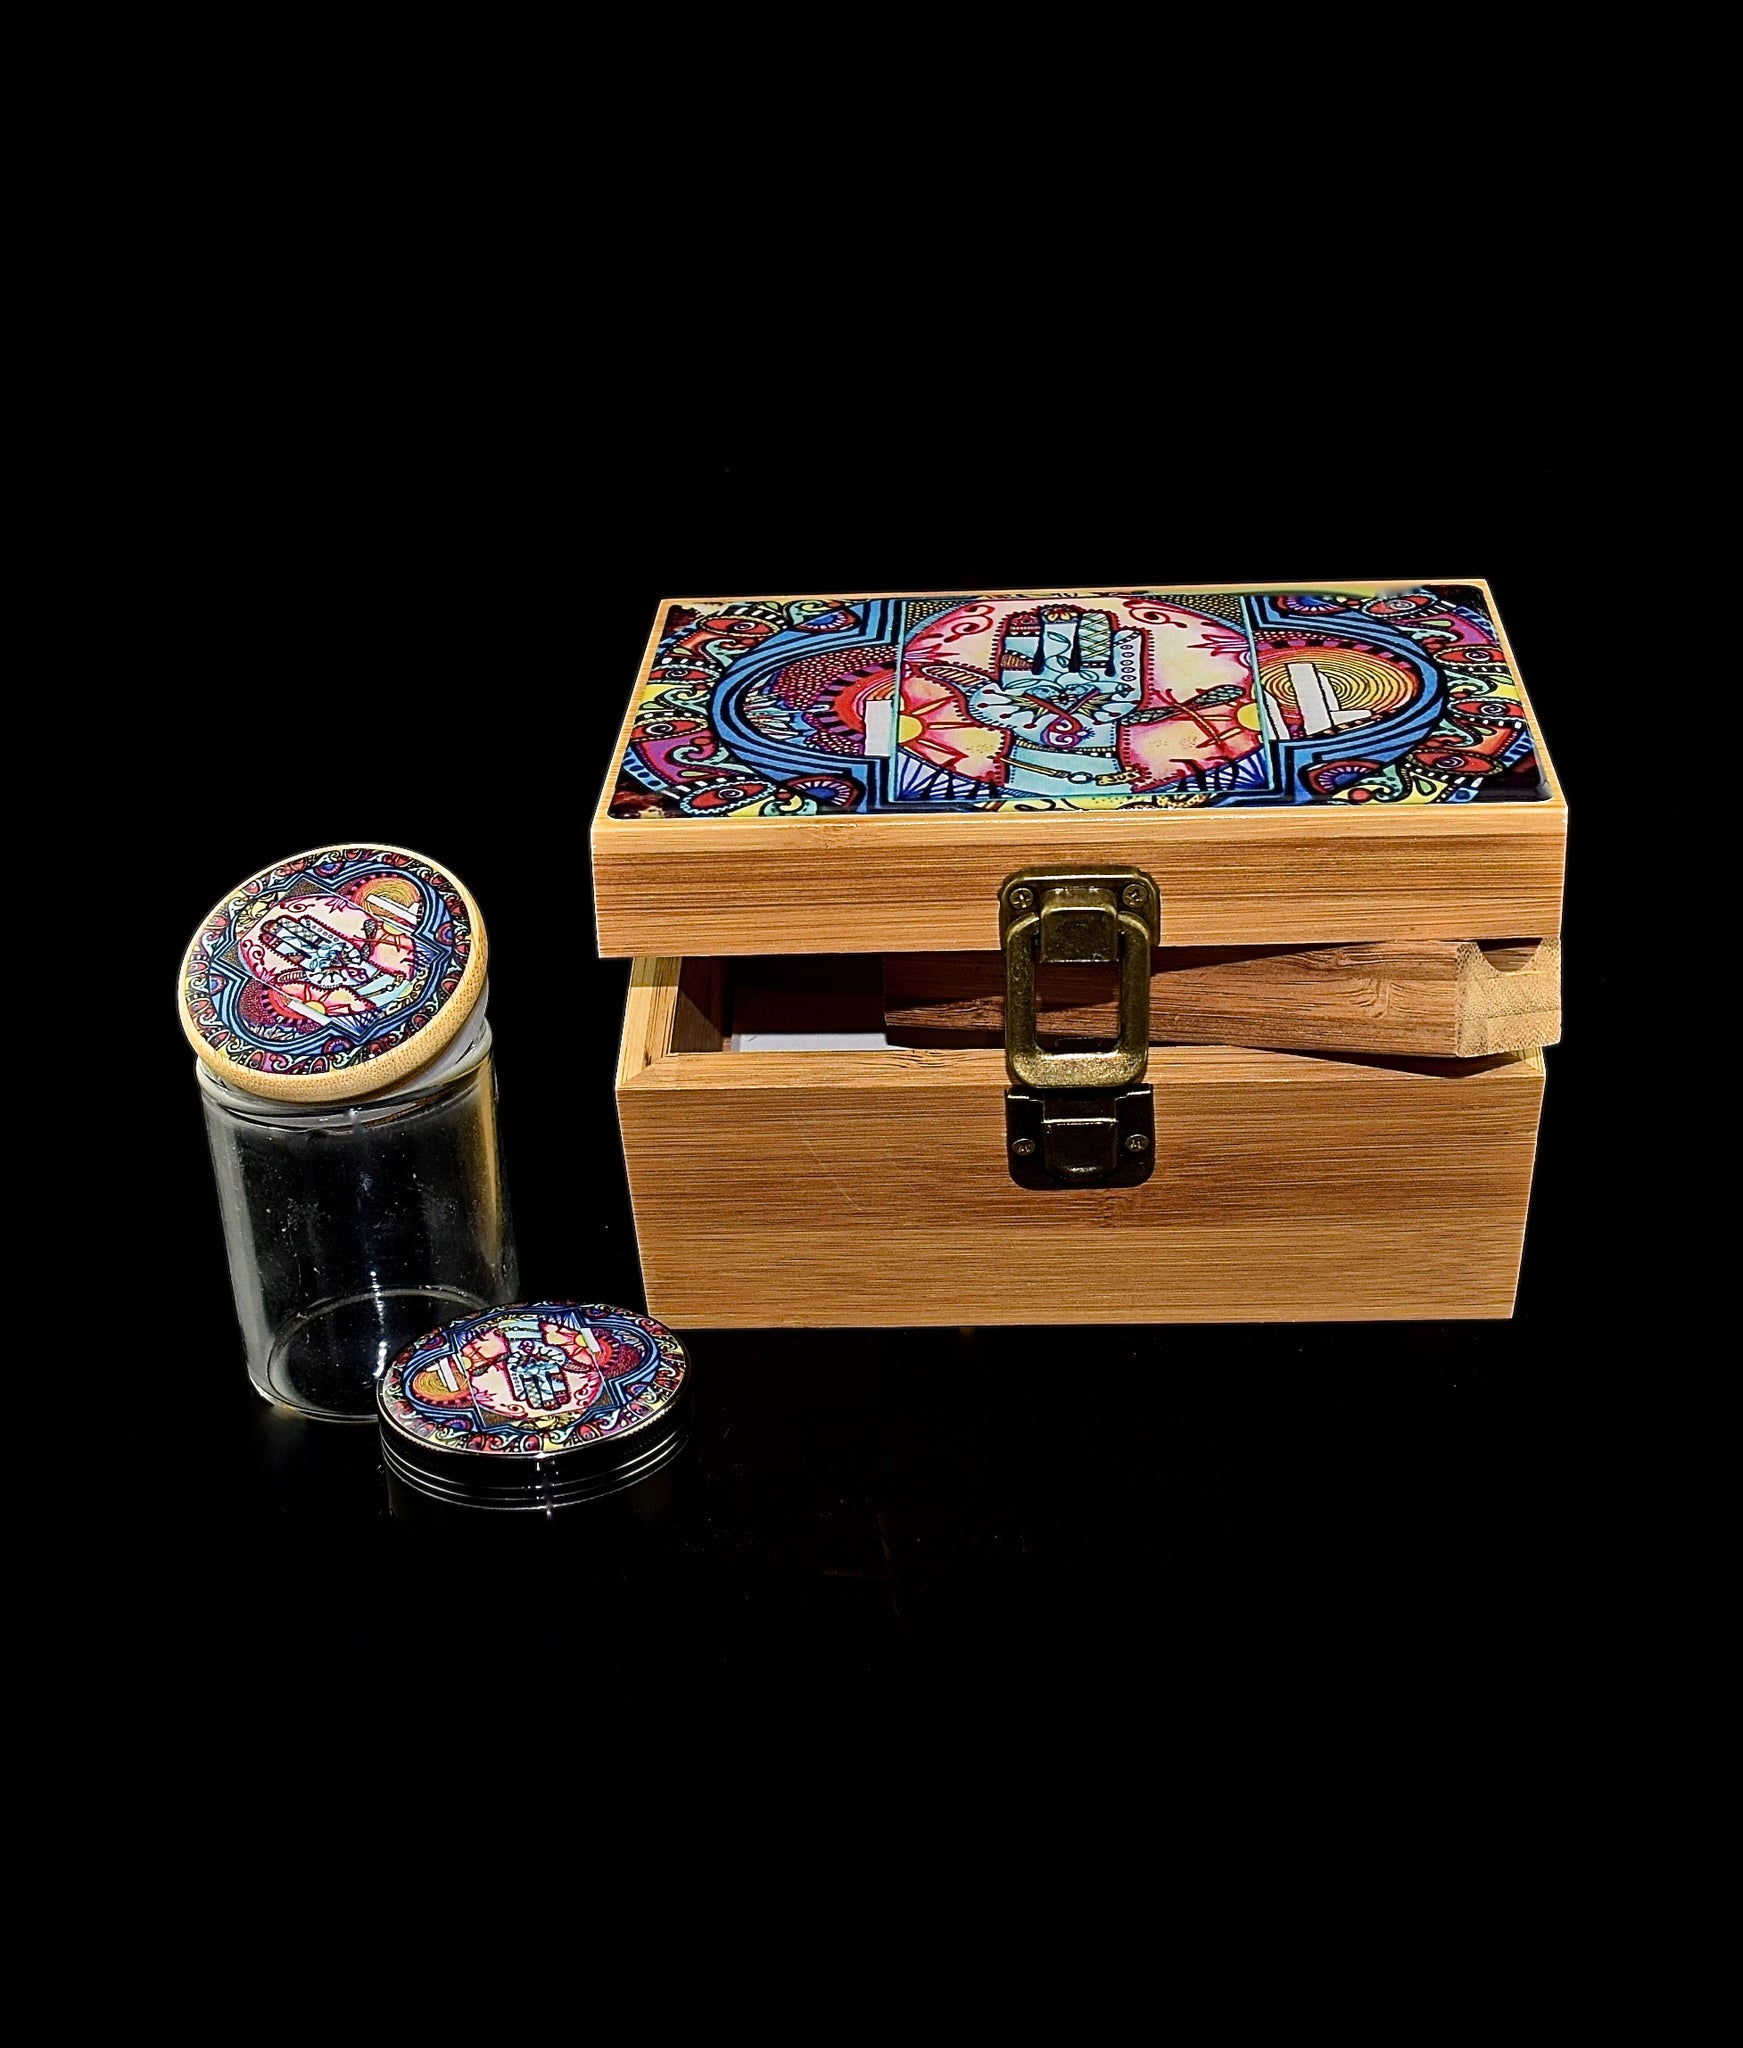 Lost in Space Stash Box Combo, 4 Part Herb Grinder, UV Glass Jar (100 ml), Rocket Tray, Poking Tool, Locking Stash Box for Herb with Accessories Kit -1030